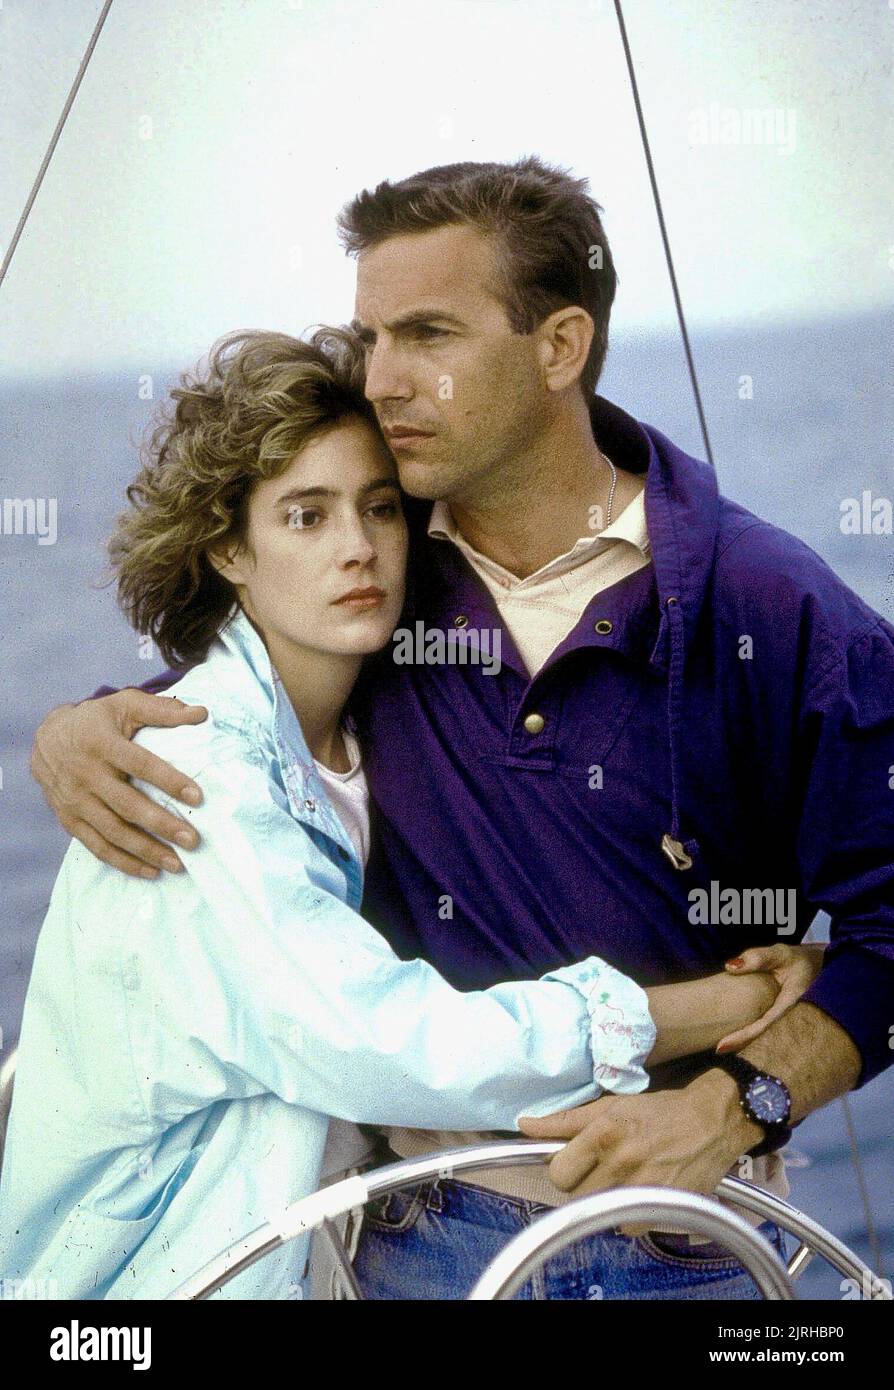 SEAN YOUNG, KEVIN COSTNER, NO WAY OUT, 1987 Stock Photo